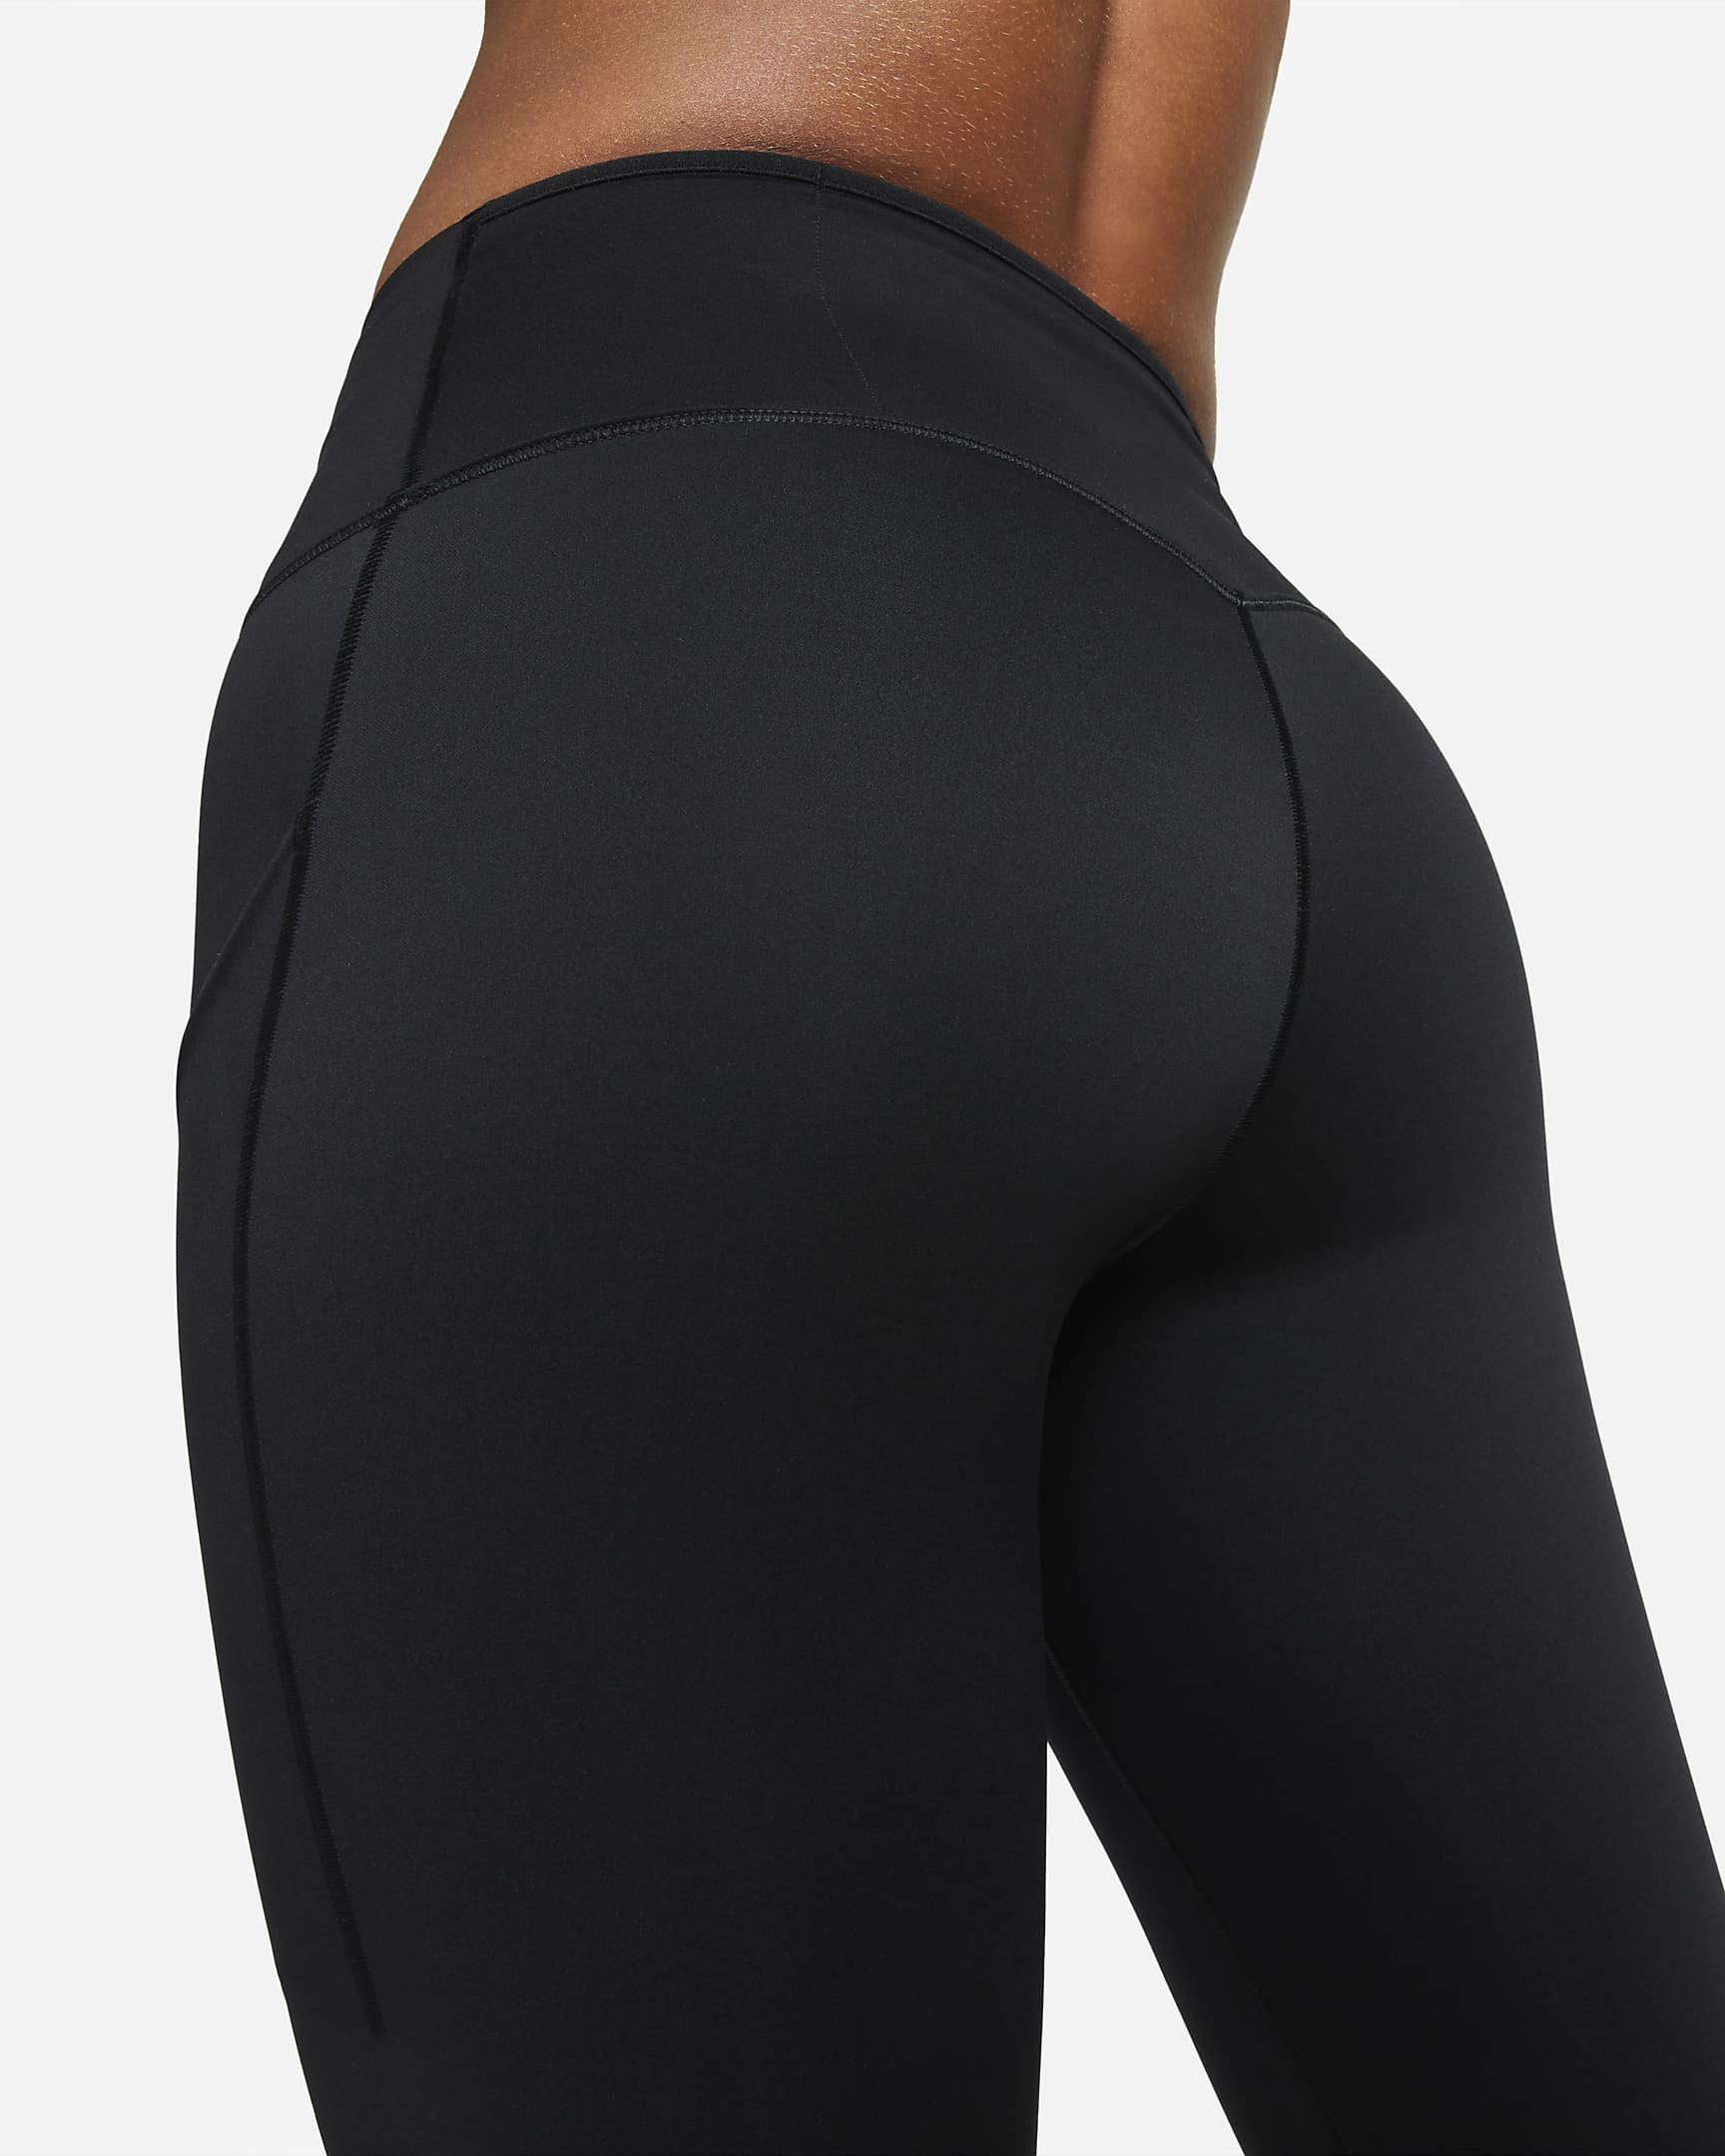 Nike Go Women's Firm-Support Mid-Rise 7/8 Leggings with Pockets. Nike.com